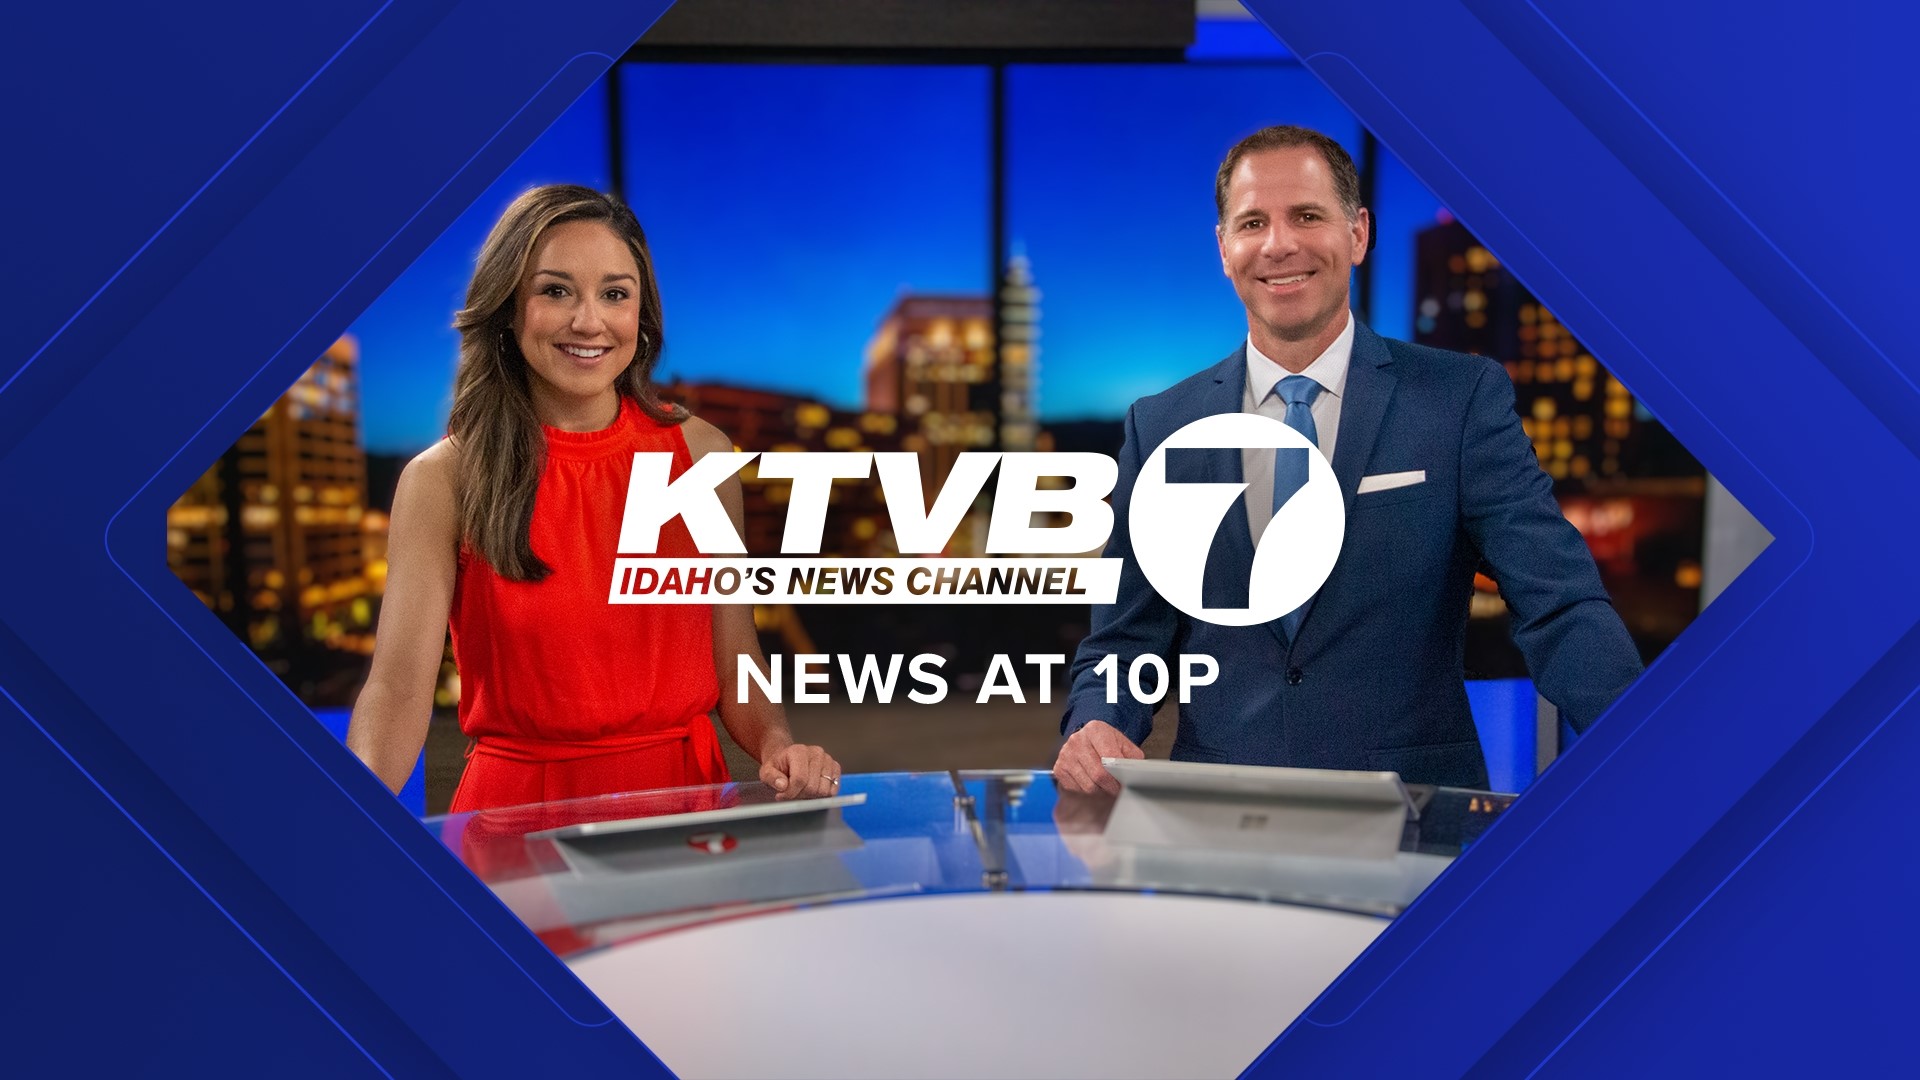 End your day with 1st Alert Weather from a certified local meteorologist & the day’s most important local, regional, national news from Idaho's #1 news organization.